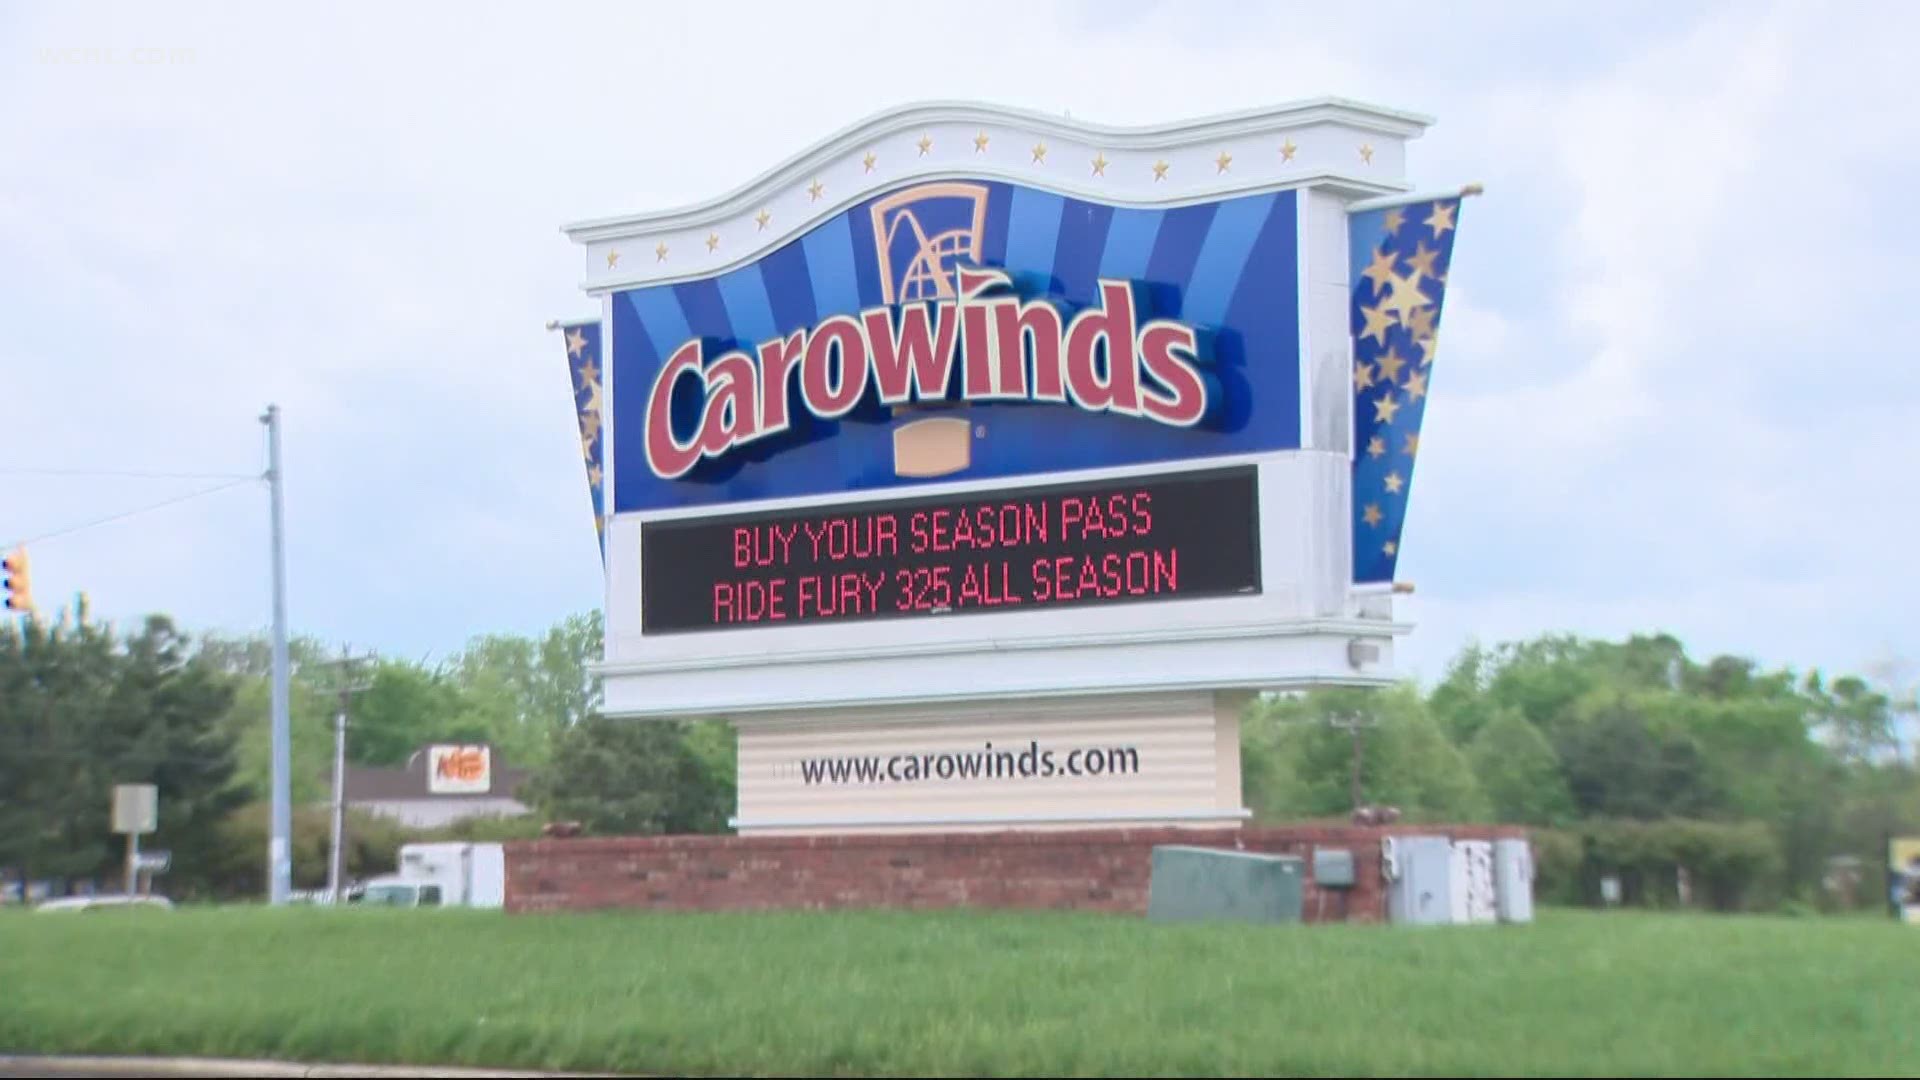 Carowinds announced on Tuesday that they will remain closed for the 2020 season due to the coronavirus pandemic.